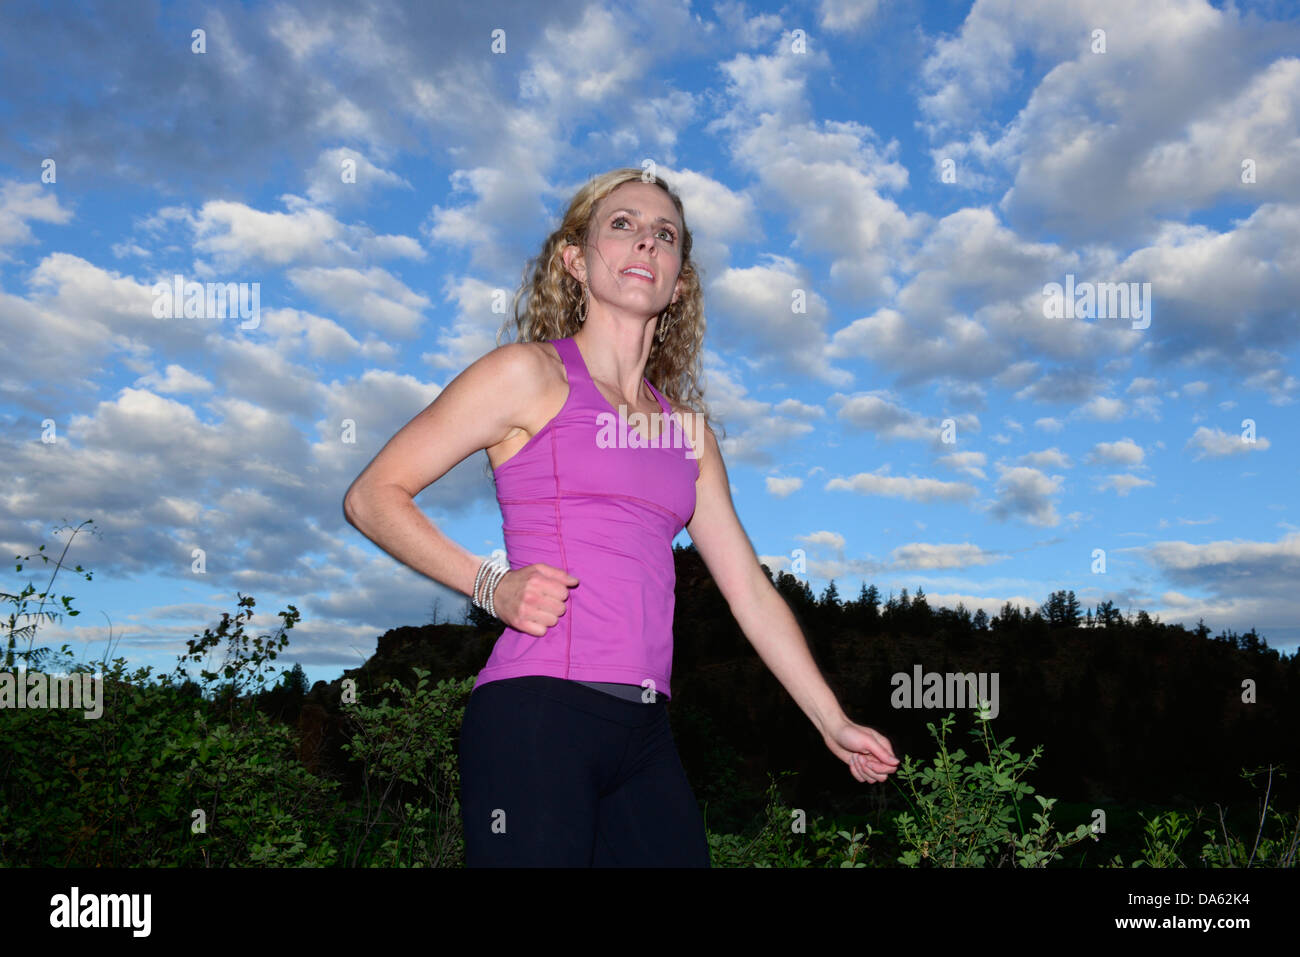 USA, United States, America, North America, Pacific Northwest, Oregon, Deschutes County, running, outdoor, trail, clouds, woman, Stock Photo